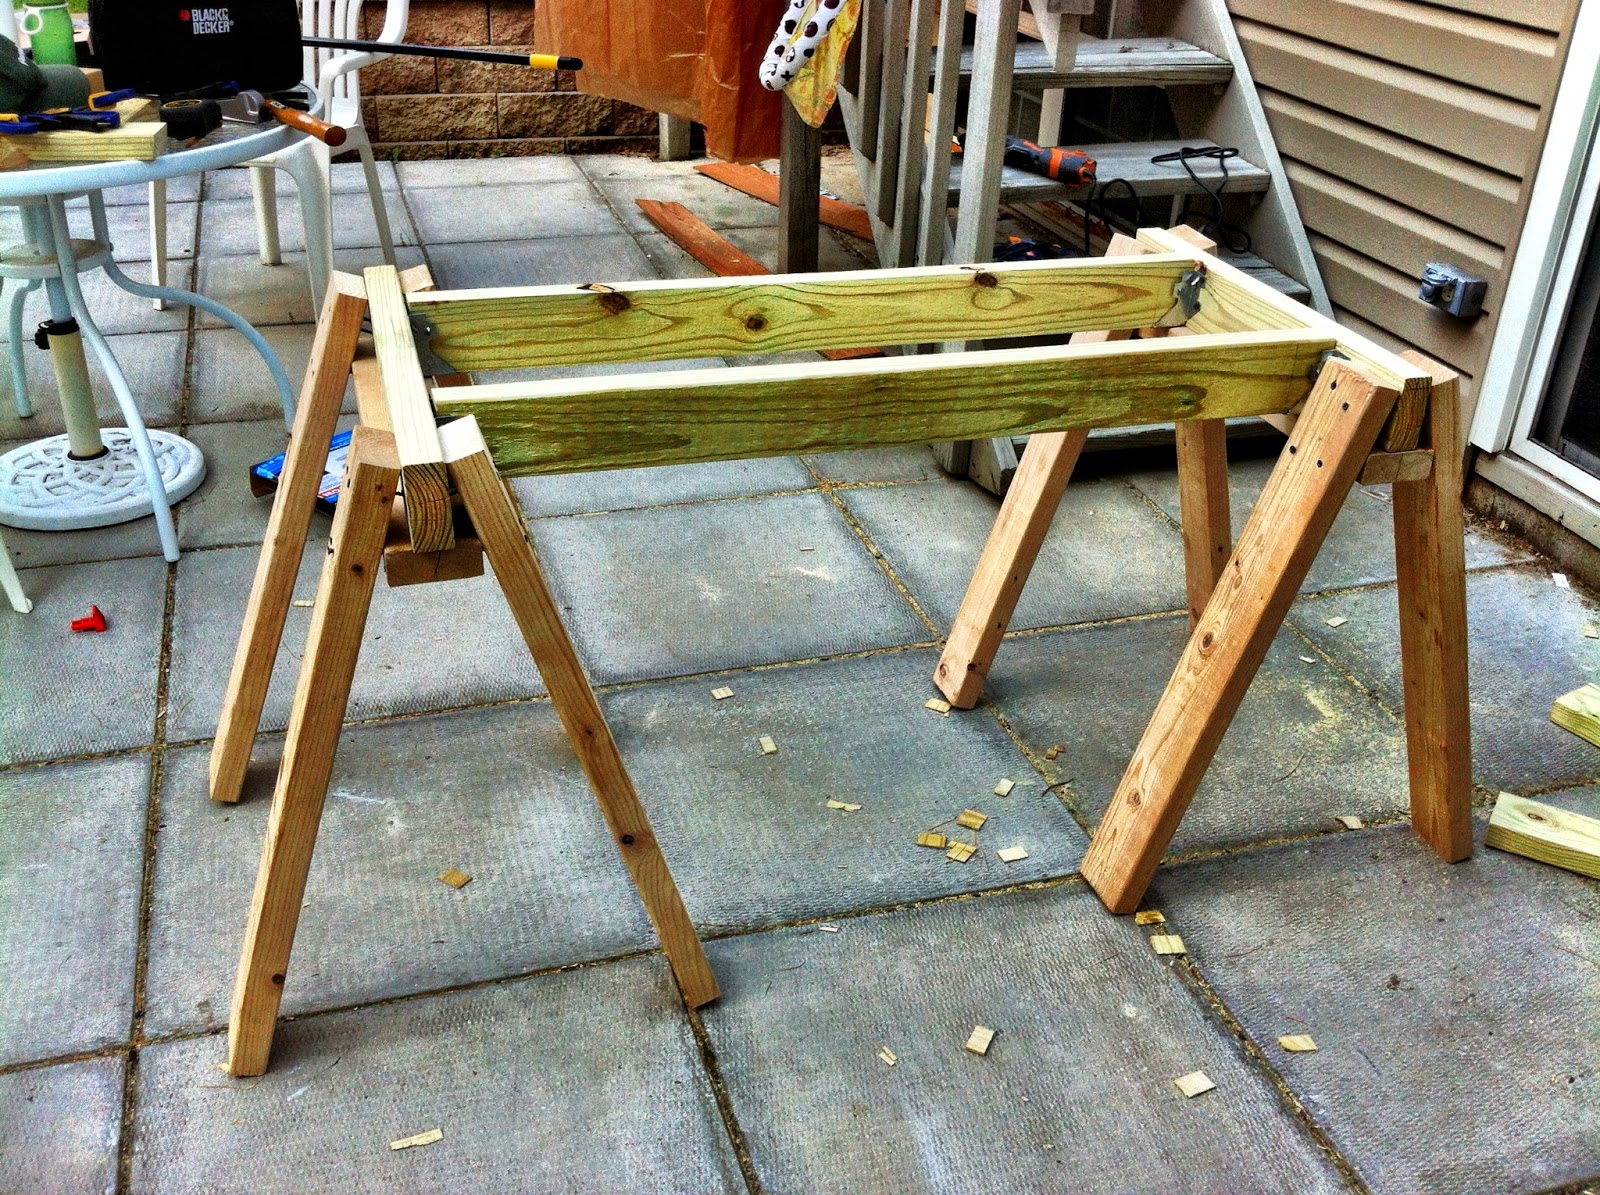 Pittsburgher back from the Sandbox: Building a sawhorse workbench